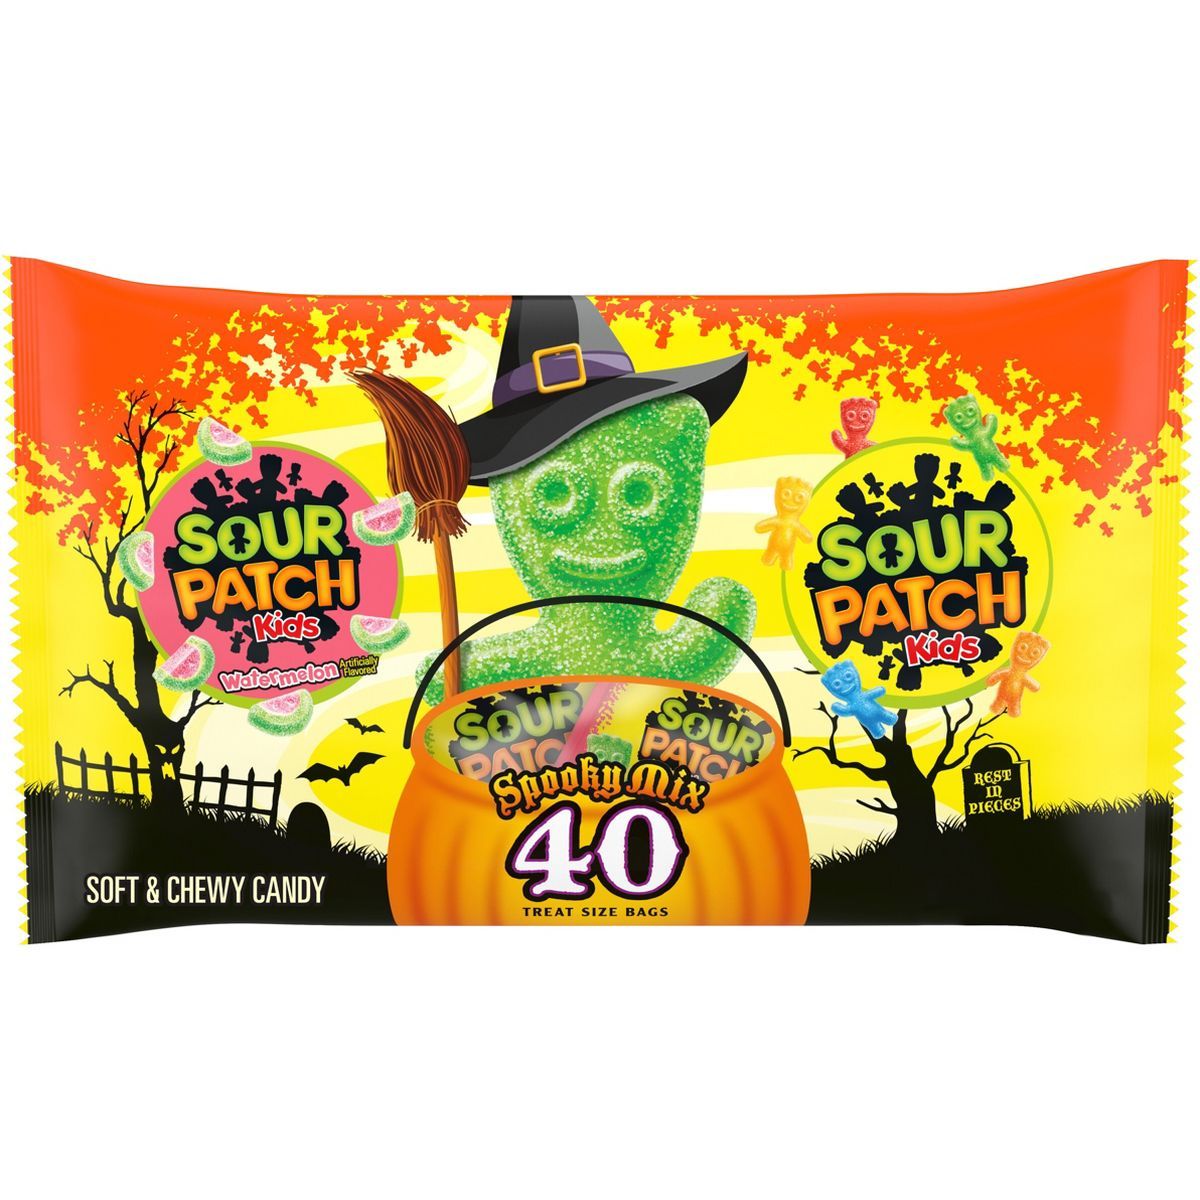 Sour Patch Kids & Sour Patch Watermelon Halloween Candy Variety Pack Treat Size - 22oz/40ct | Target